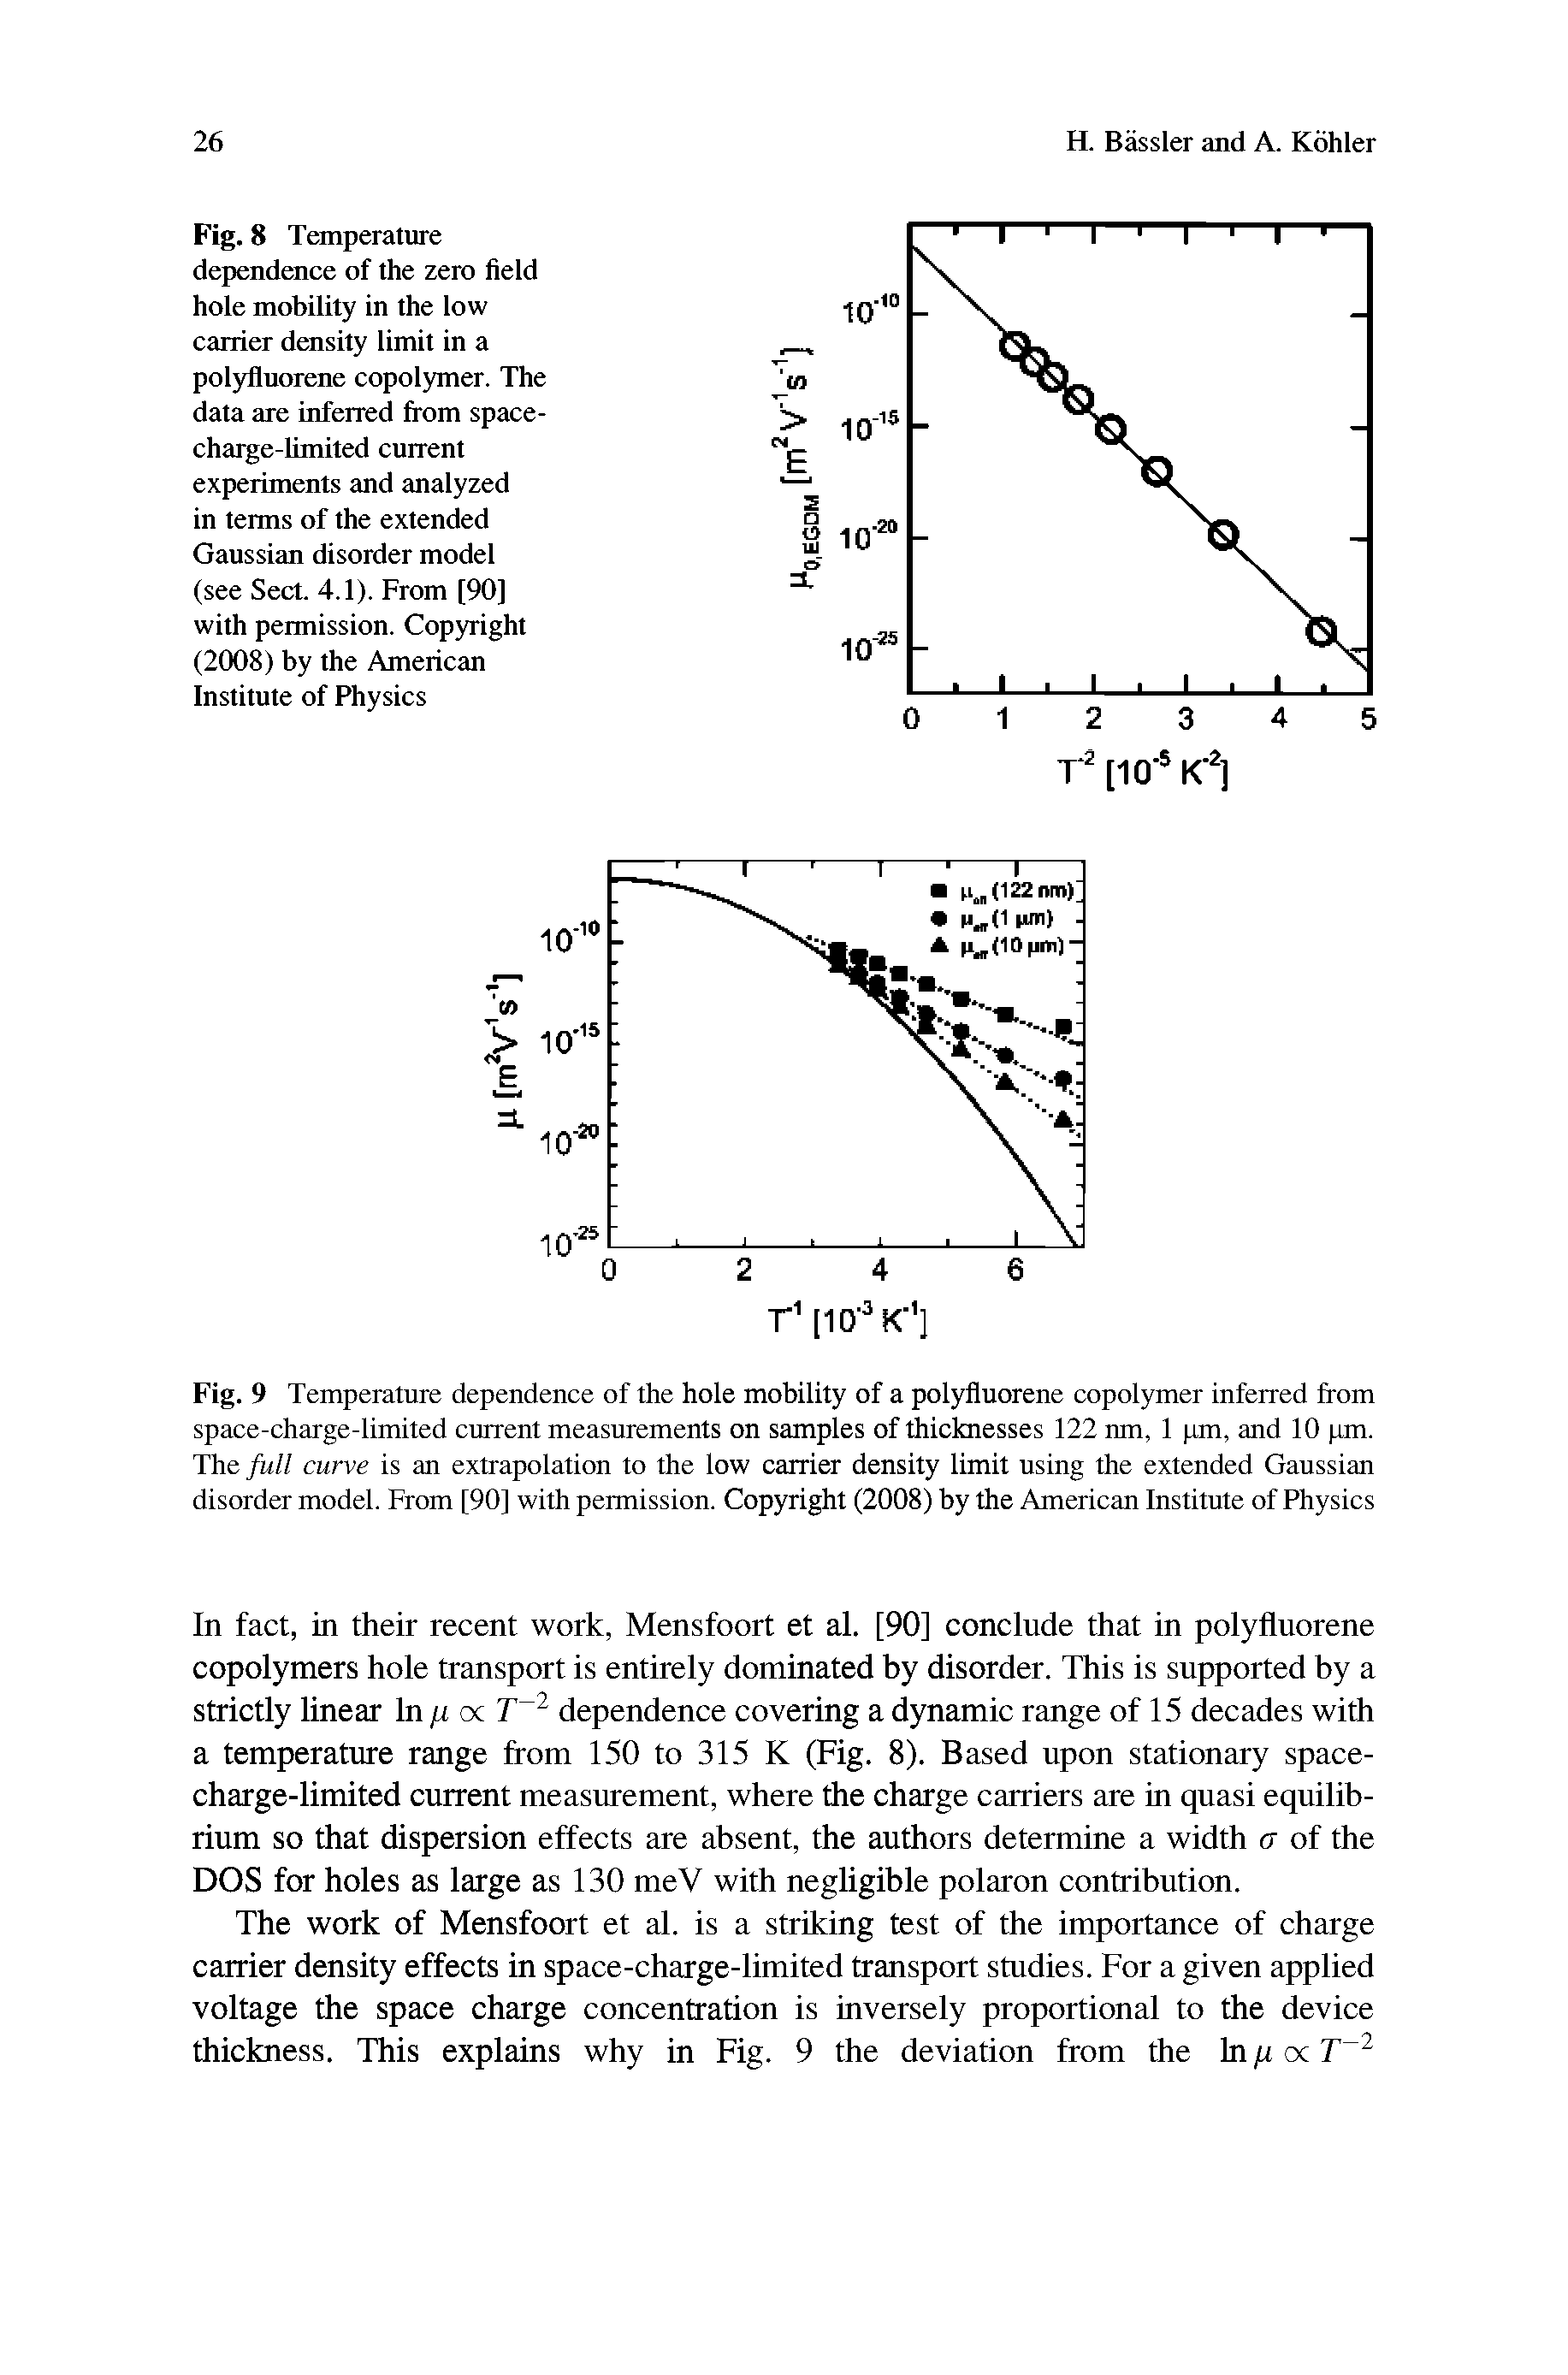 Fig. 9 Temperature dependence of the hole mobility of a polyfluorene copolymer inferred from space-charge-limited current measurements on samples of thicknesses 122 nm, 1 pm, and 10 pm. The full curve is an extrapolation to the low carrier density limit using the extended Gaussian disorder model. From [90] with permission. Copyright (2008) by the American Institute of Physics...